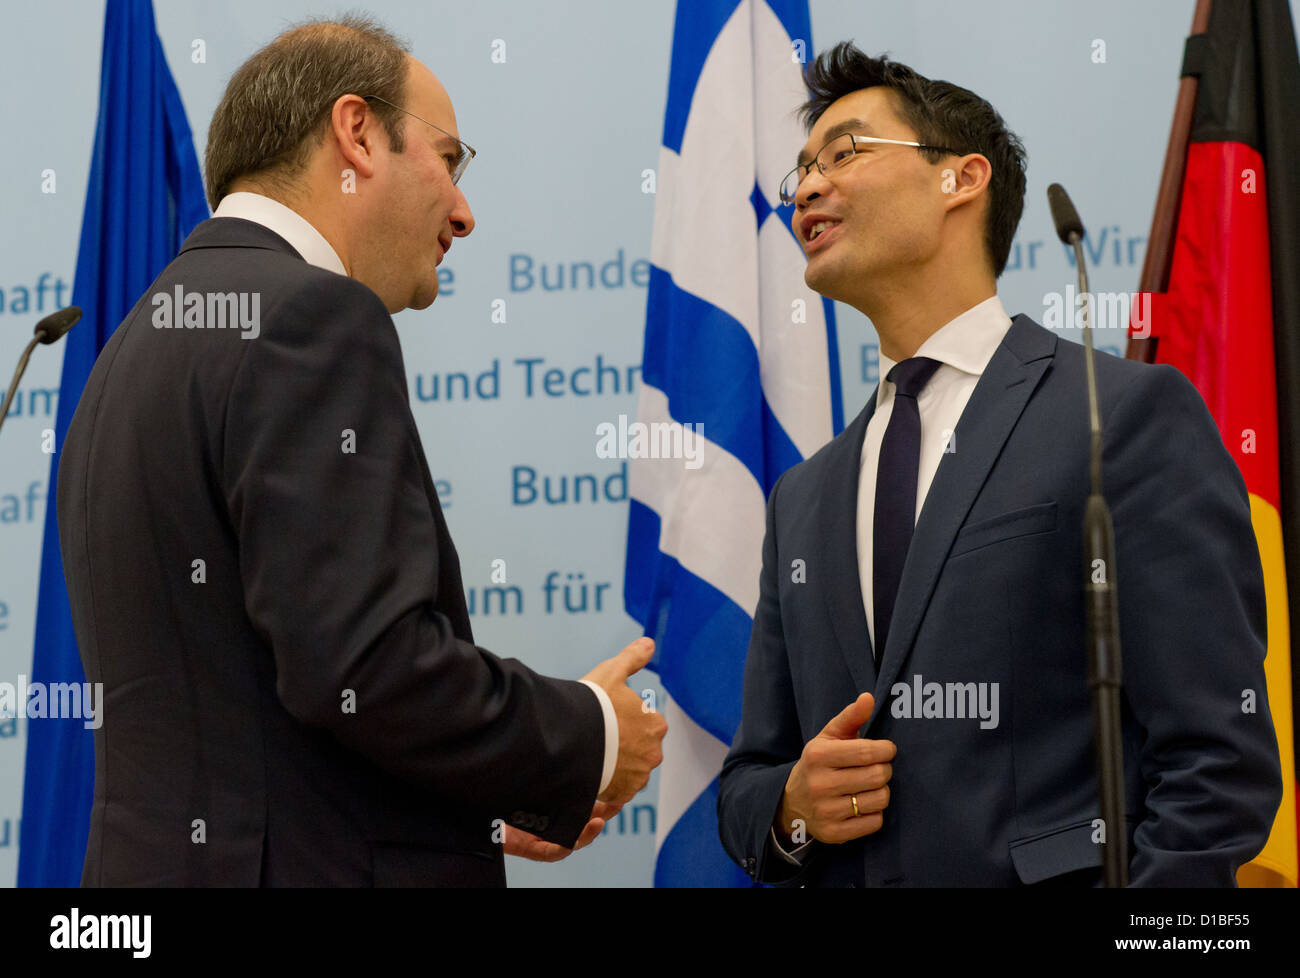 German Economy Minister Philipp Roesler and his Greek counterpart Konstantinos Chatzidakis (L) give a press conference in Berlin, Germany, 13 December 2012. Photo: TIM BRAKEMEIER Stock Photo